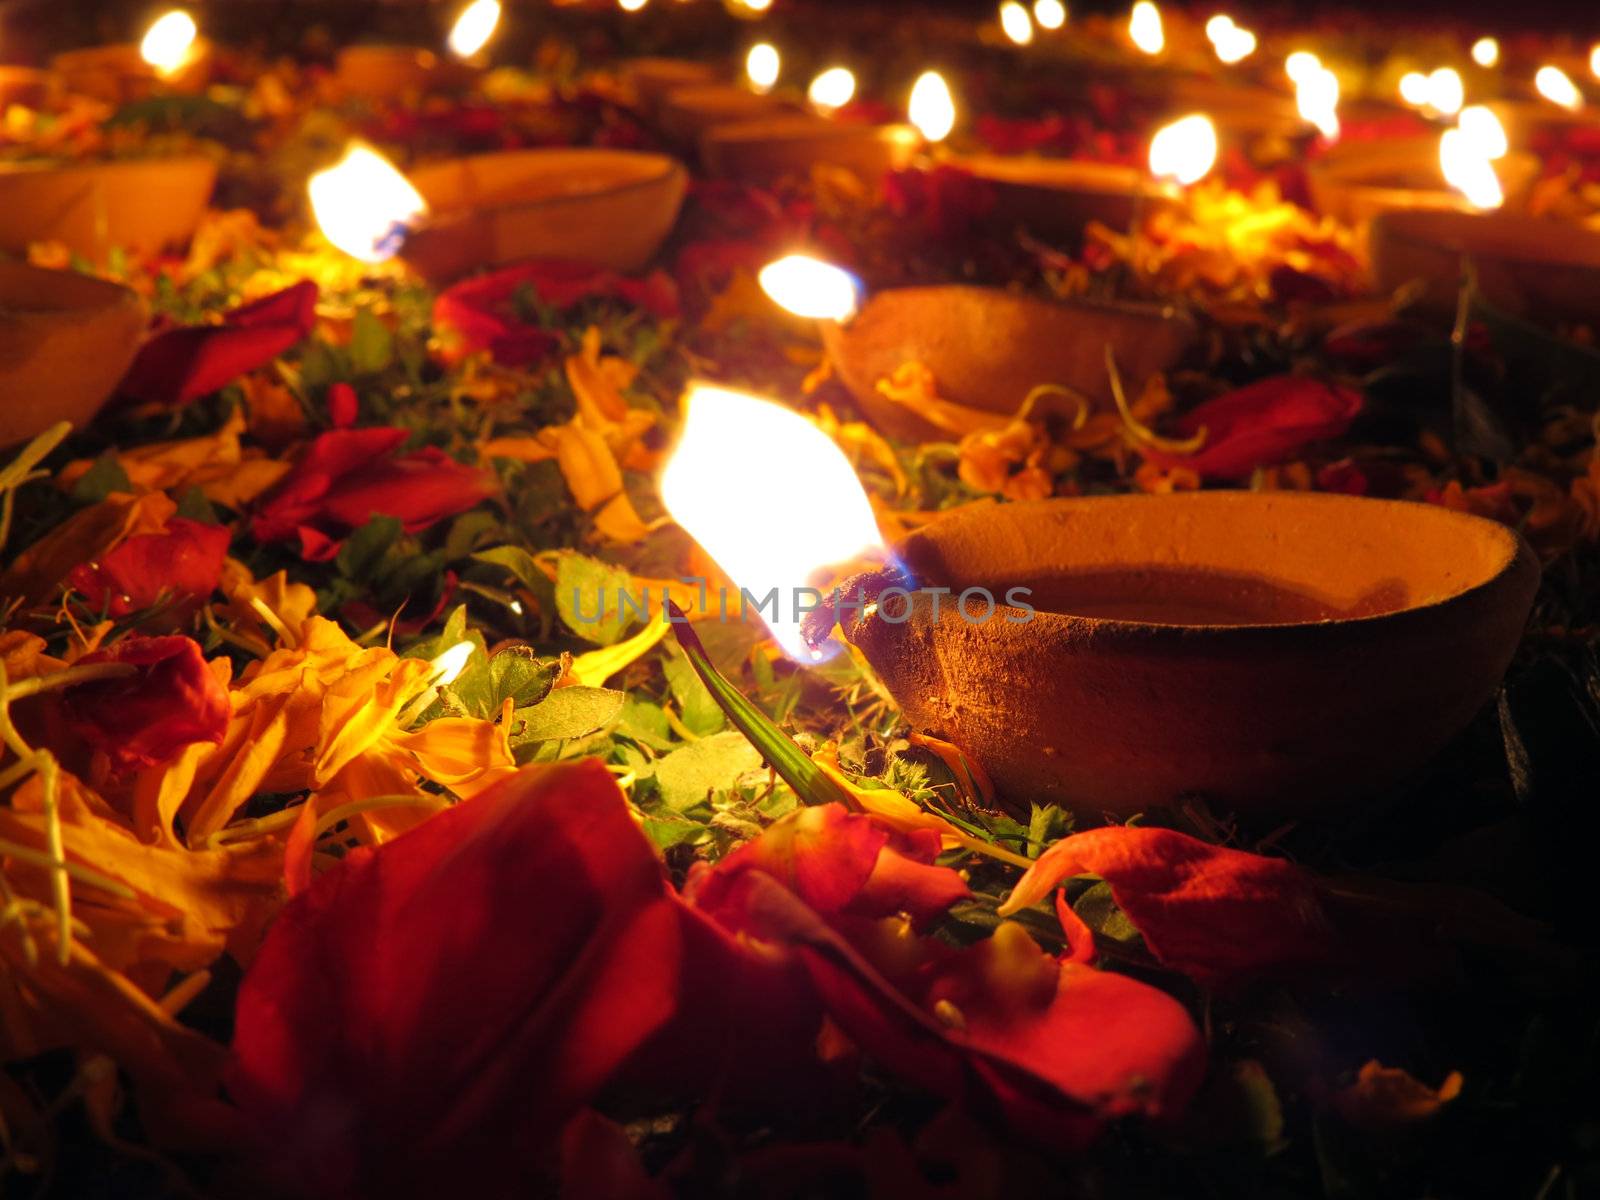 Traditional earthen oil lamps lit with flowers and petals for a holy ritual during Diwali festival in India.                               